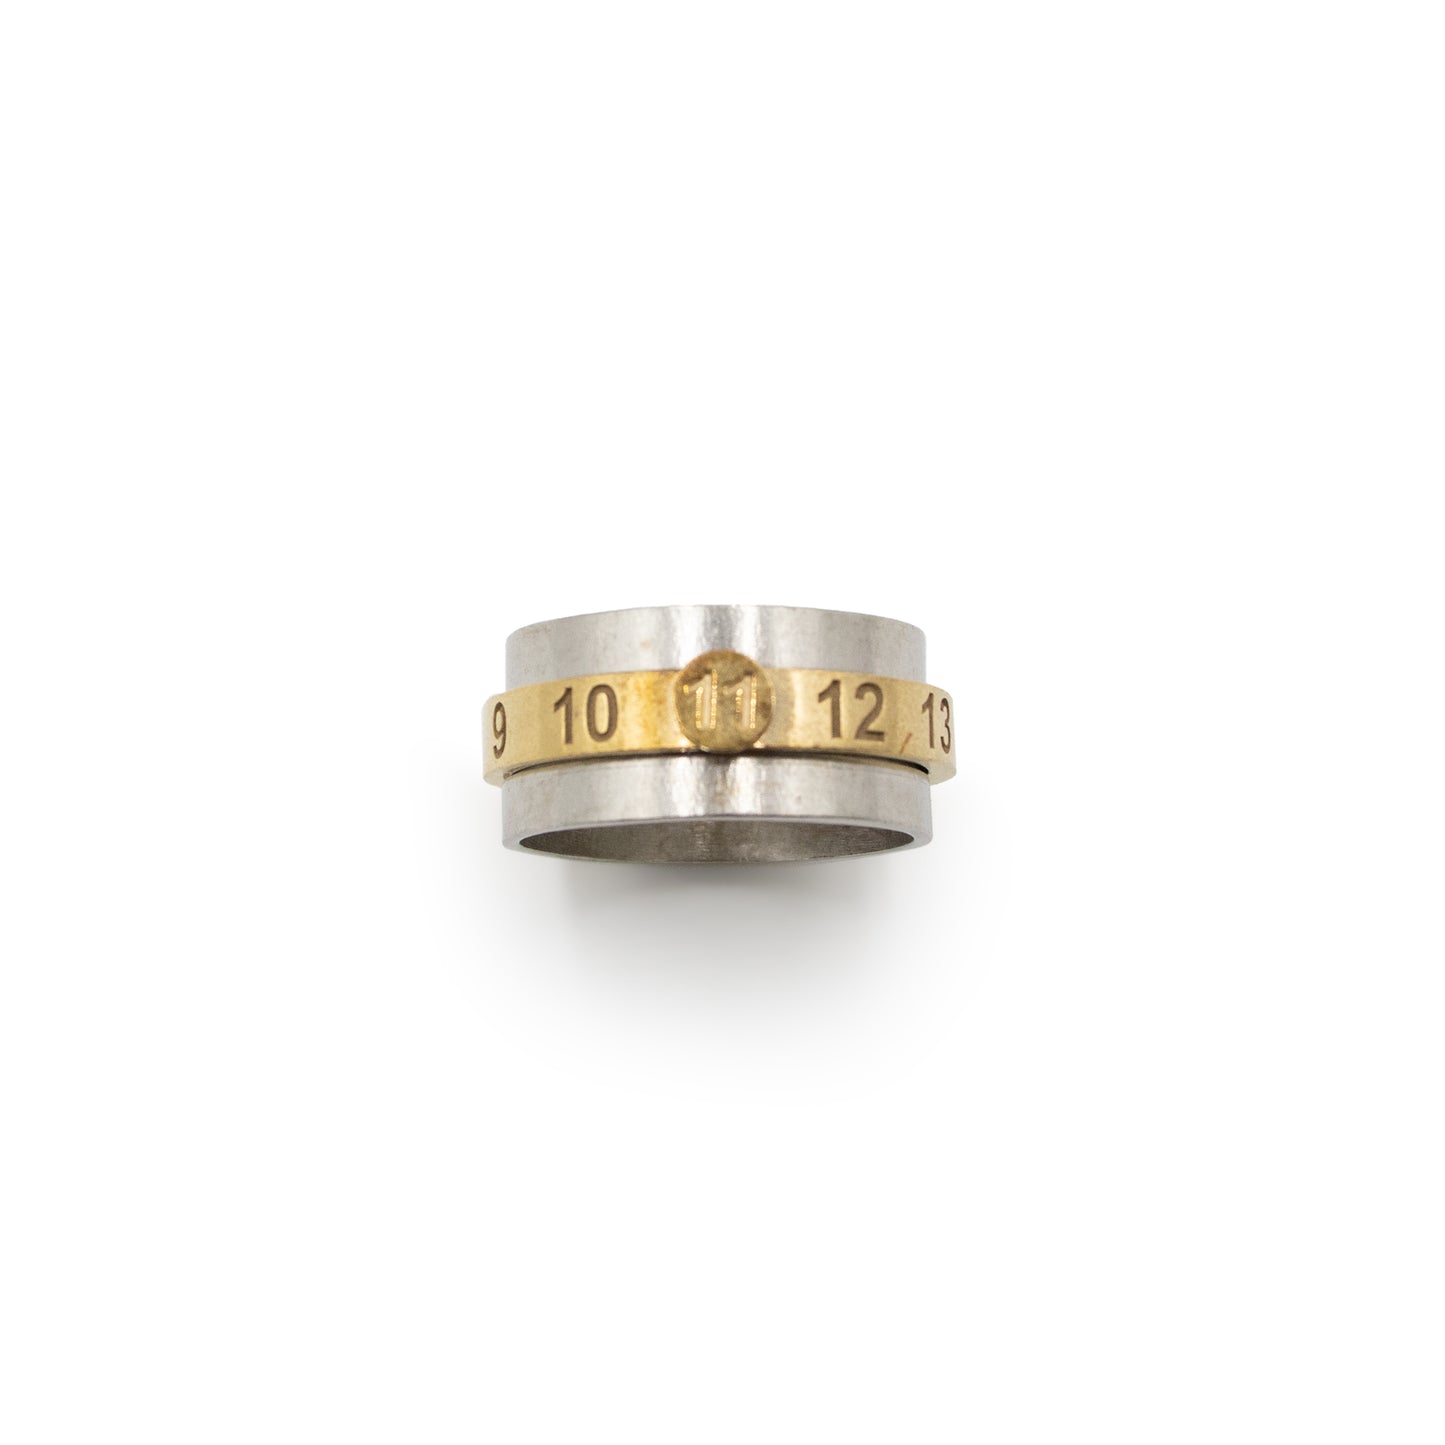 Number Engraved Ring in Silver/Gold